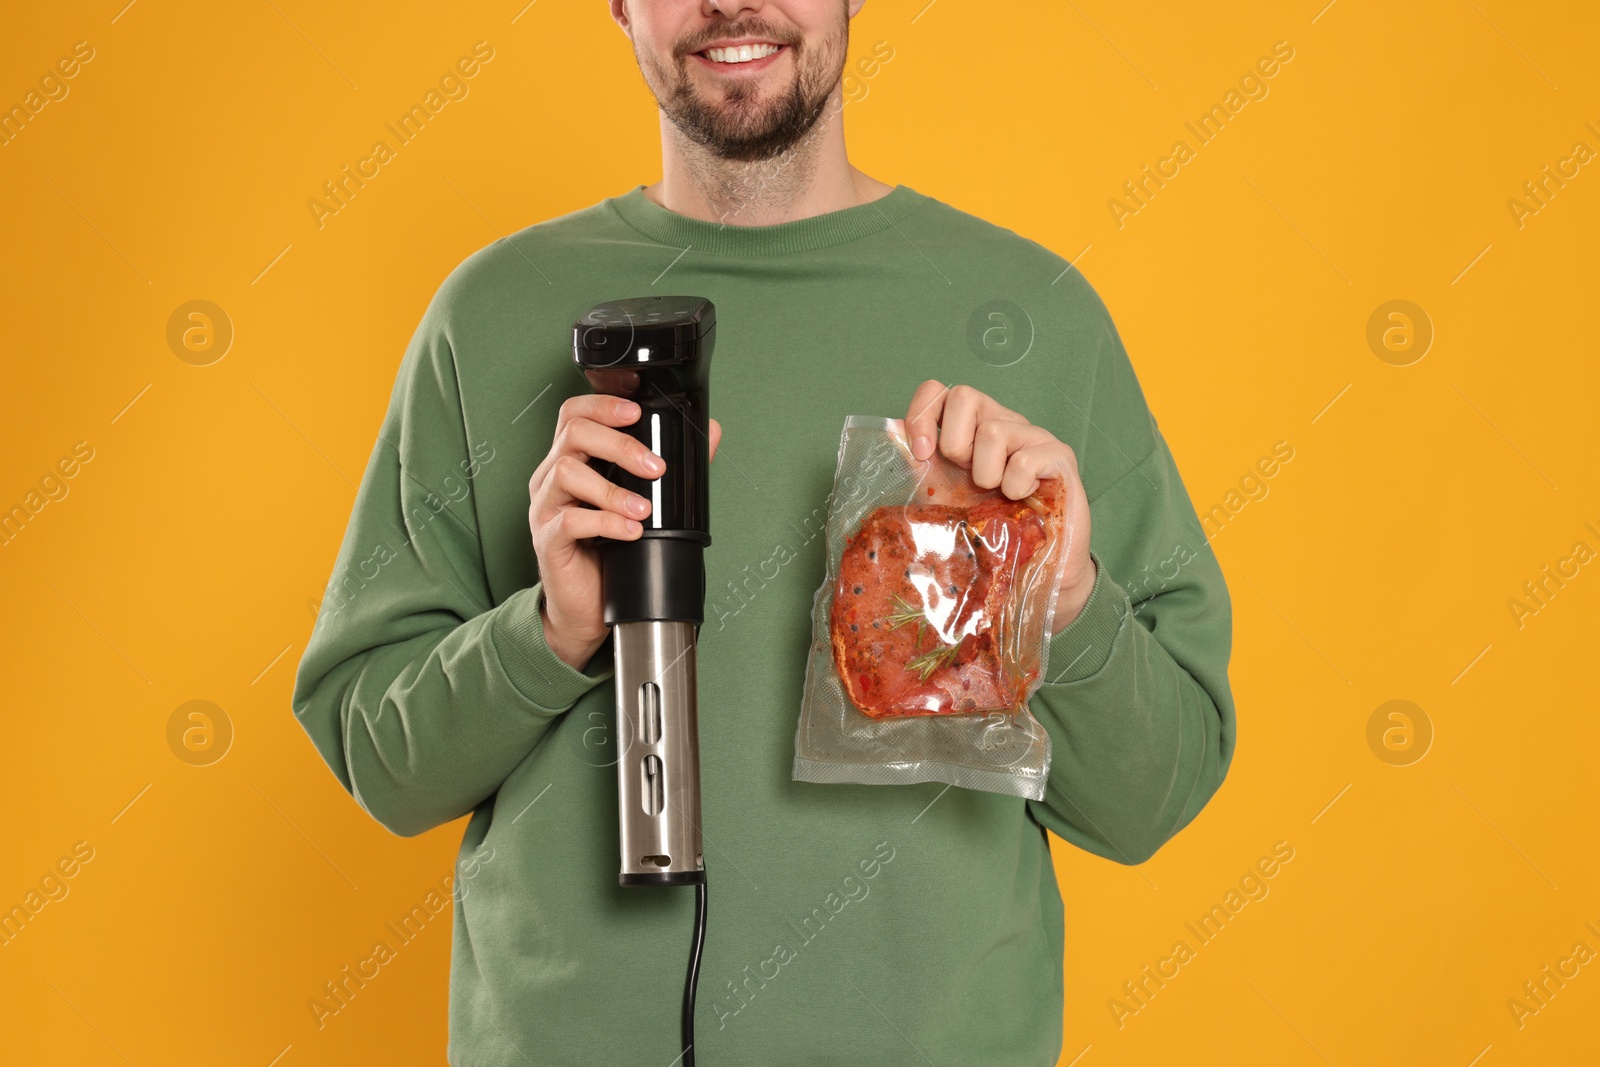 Photo of Smiling man holding sous vide cooker and meat in vacuum pack on orange background, closeup